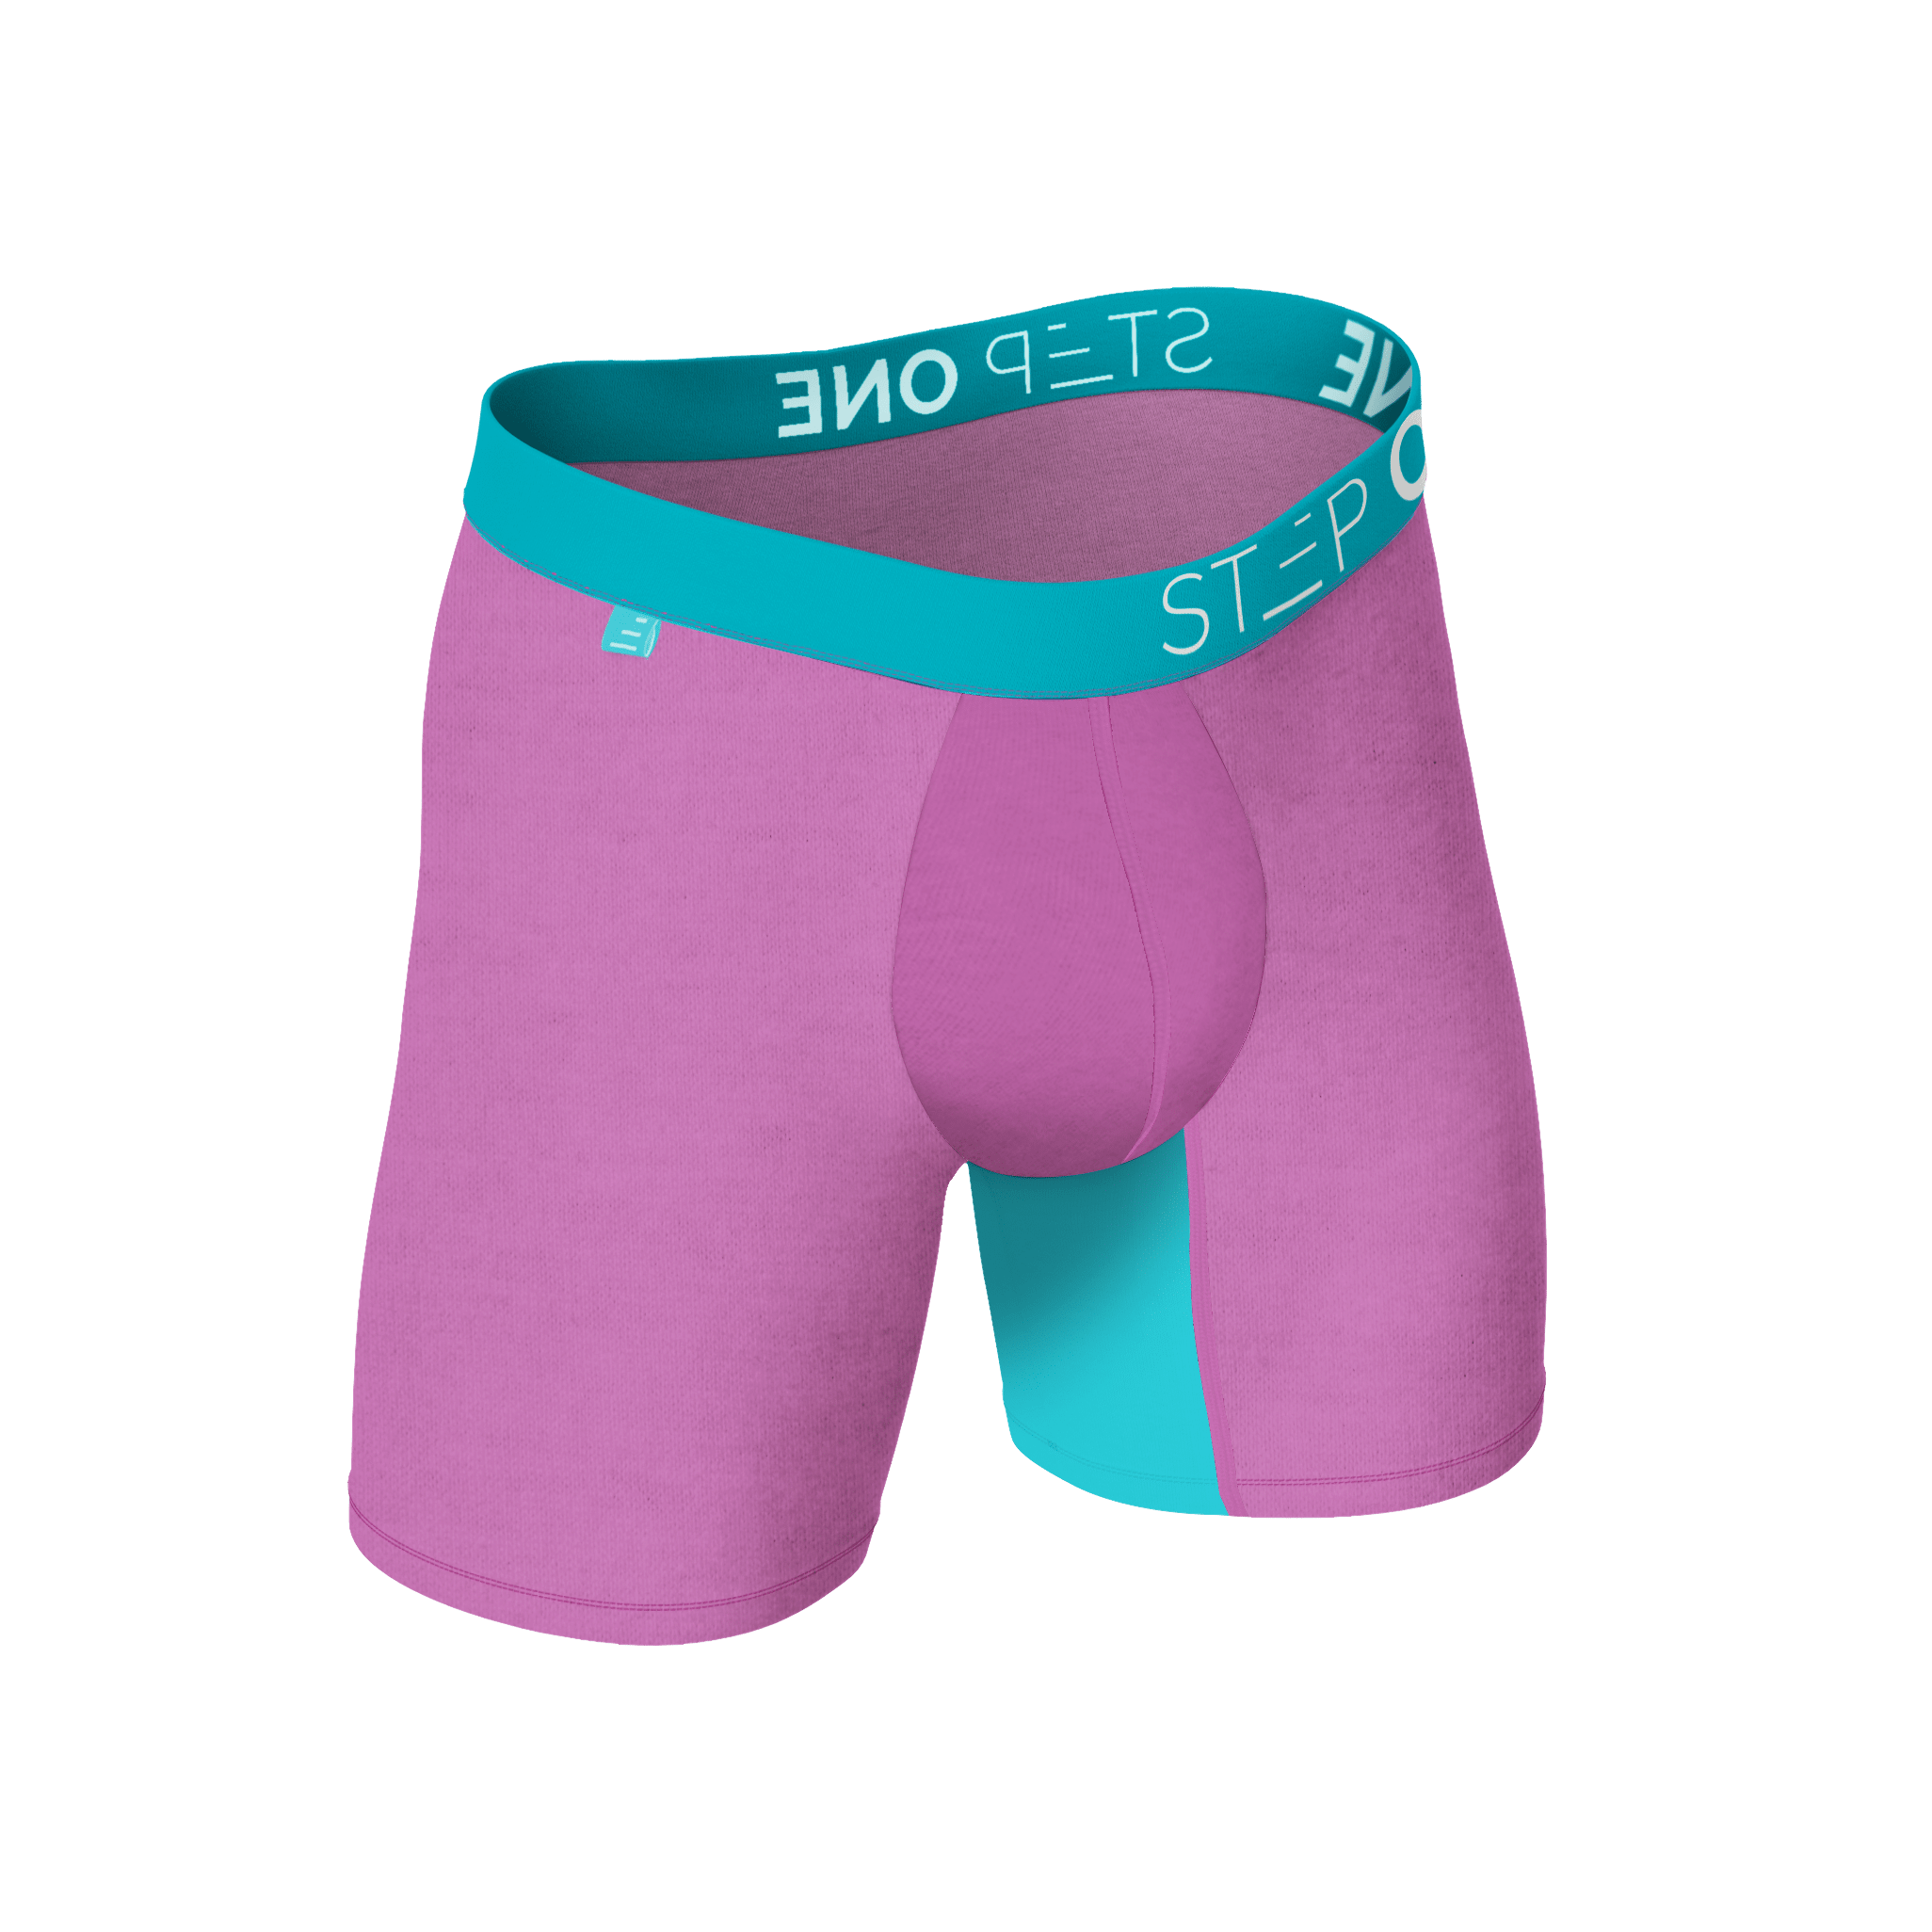 Buy Mens Bamboo Underwear Online at Step One